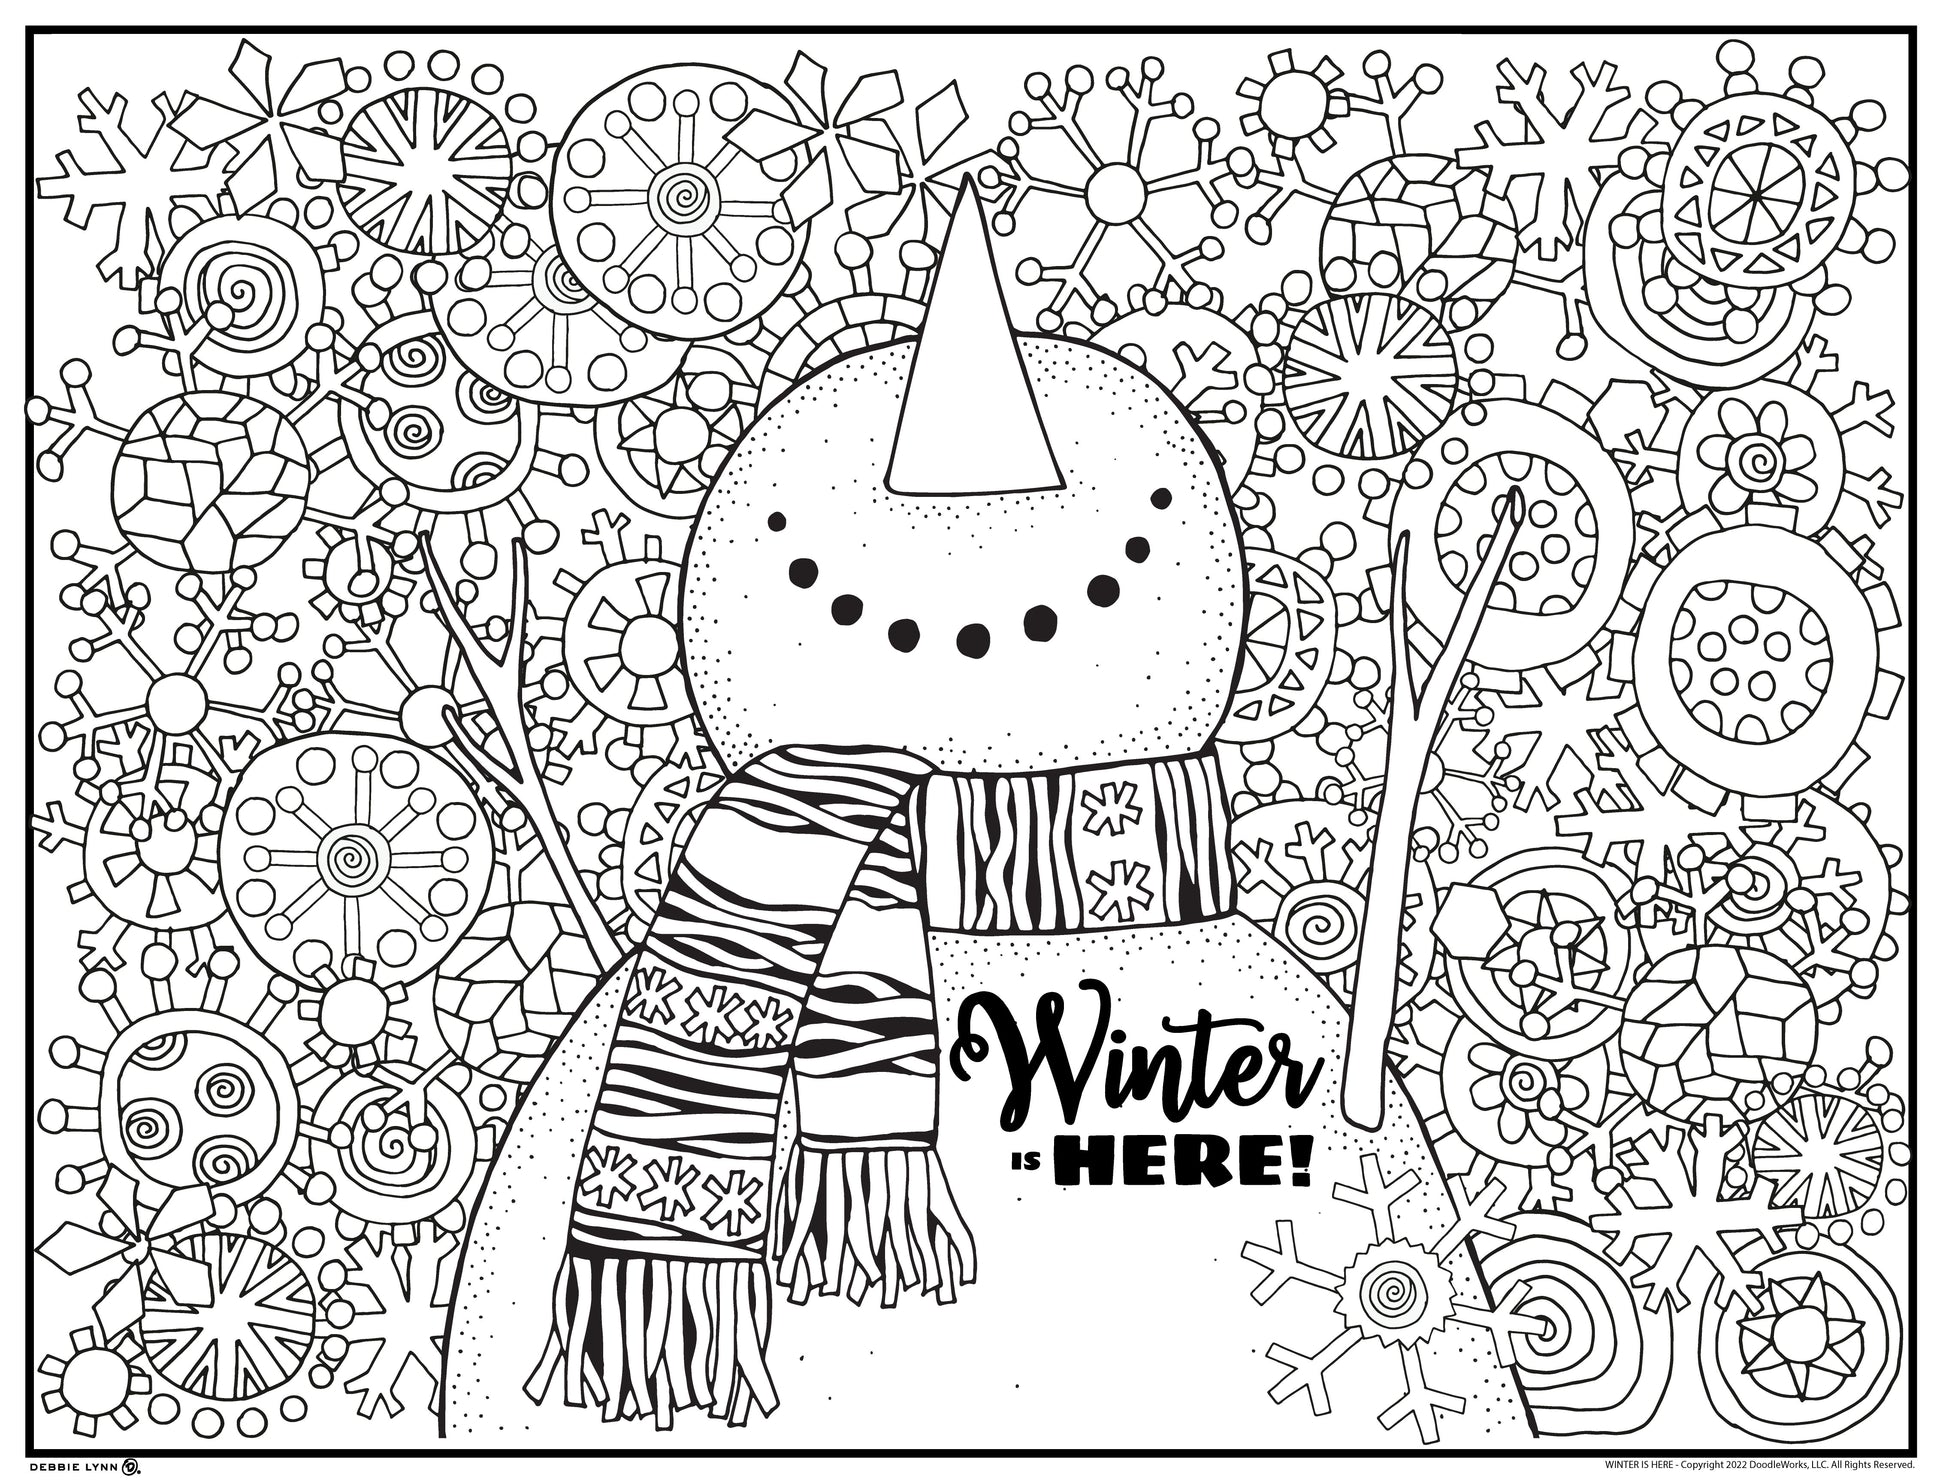 Winter is Here! Personalized Giant Coloring Poster 48x63